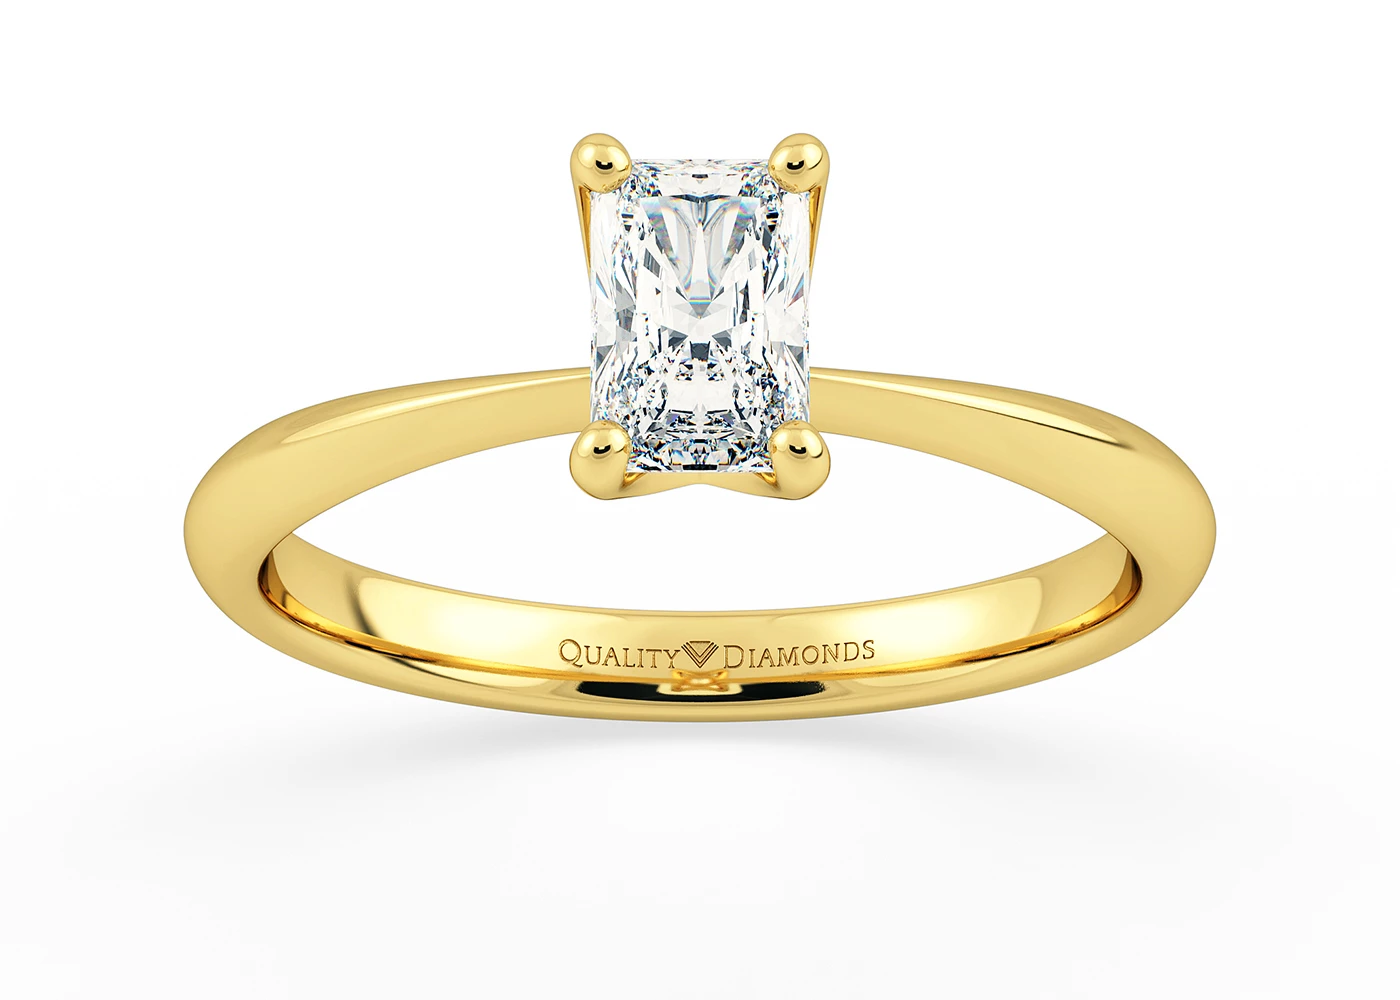 Two Carat Radiant Solitaire Diamond Engagement Ring in 18K Yellow Gold